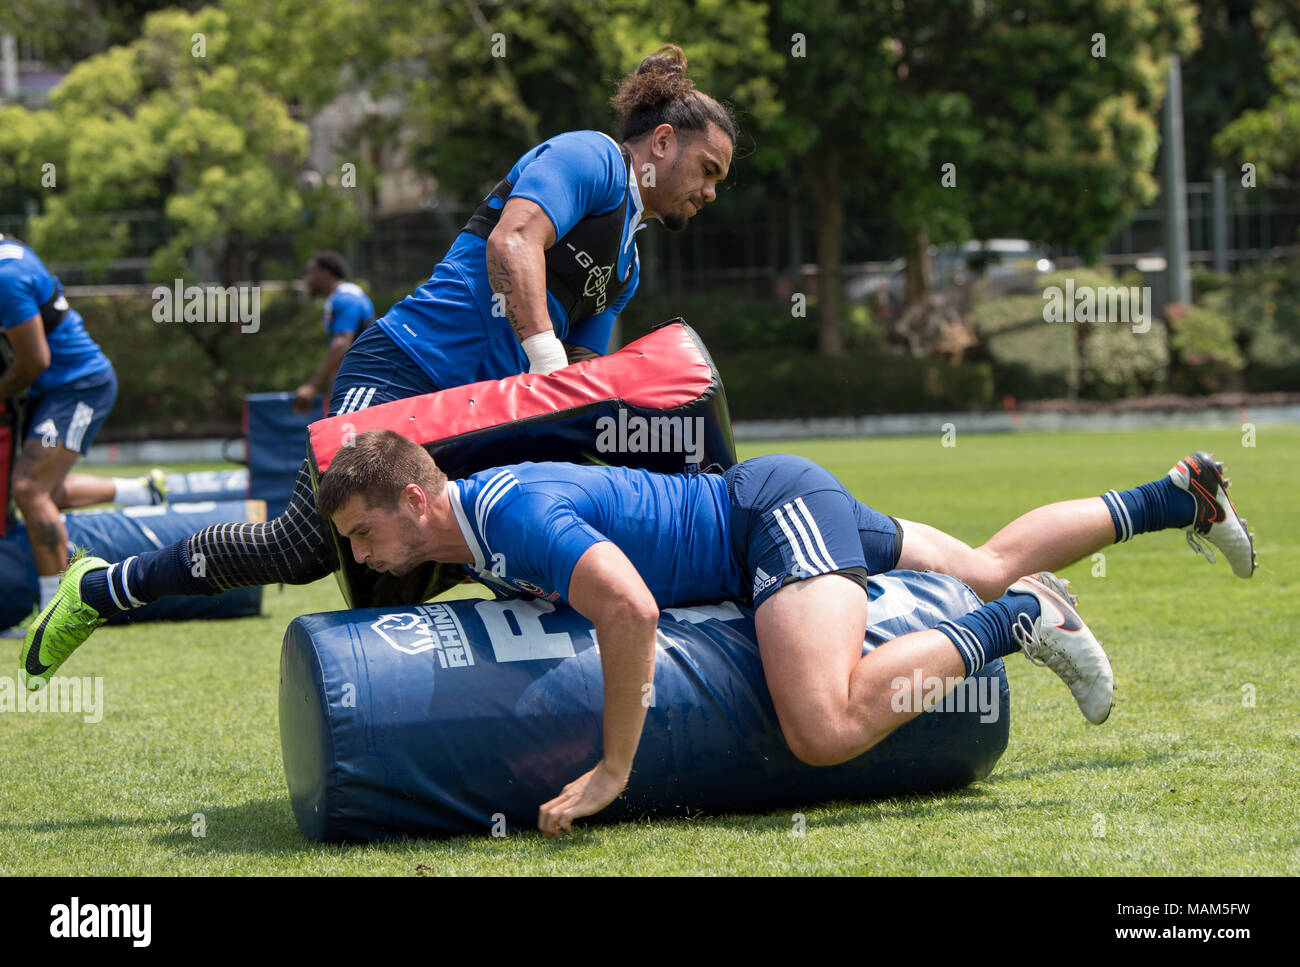 HONG KONG,HONG KONG SAR,CHINA:April 3rd 2018. The USA Rugby team conduct a training session at So Kon Po recreation ground ahead of their Hong Kong Rugby 7's matches. Brett Thompson (bottom) break past the the tackling bag of Folau Niua .Alamy Live News Stock Photo